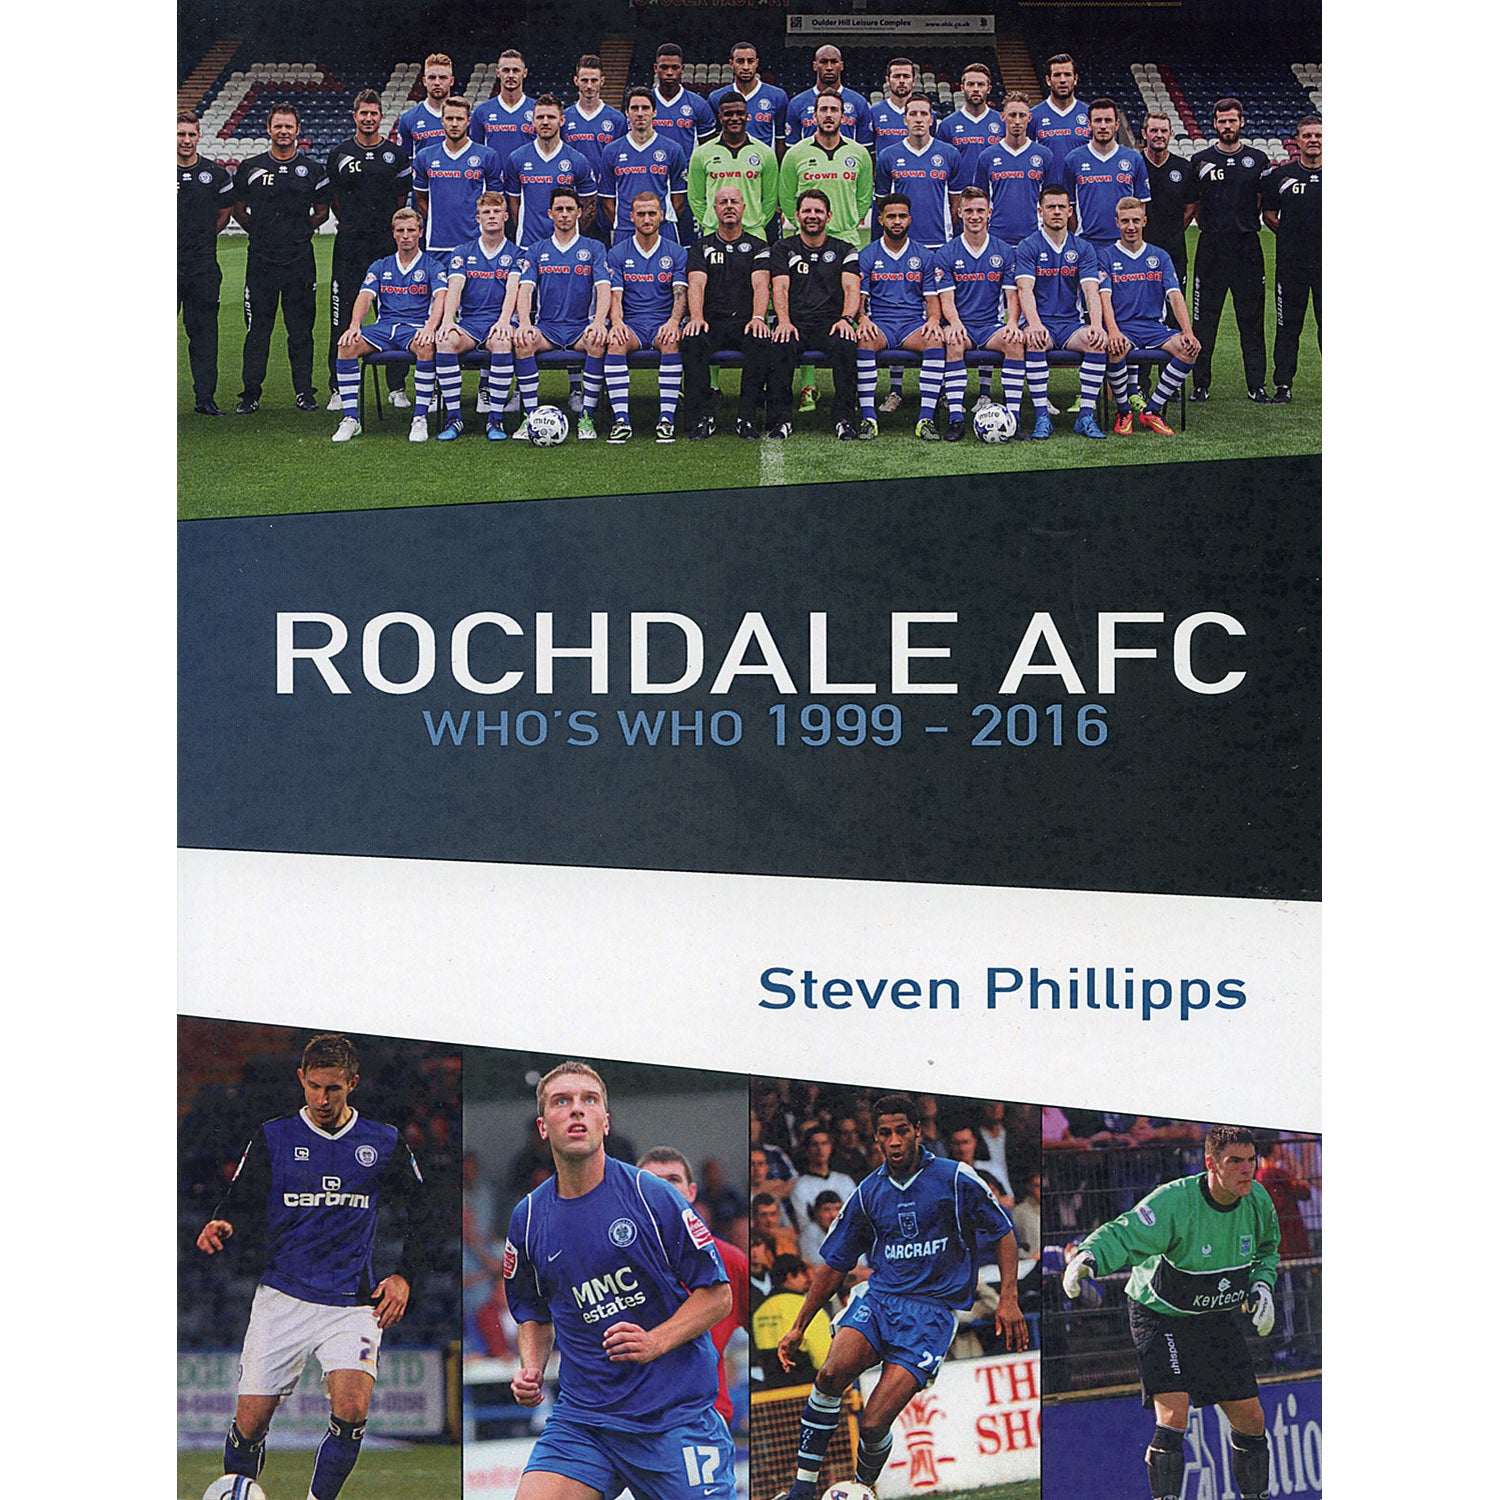 Rochdale AFC Who's Who 1999-2016